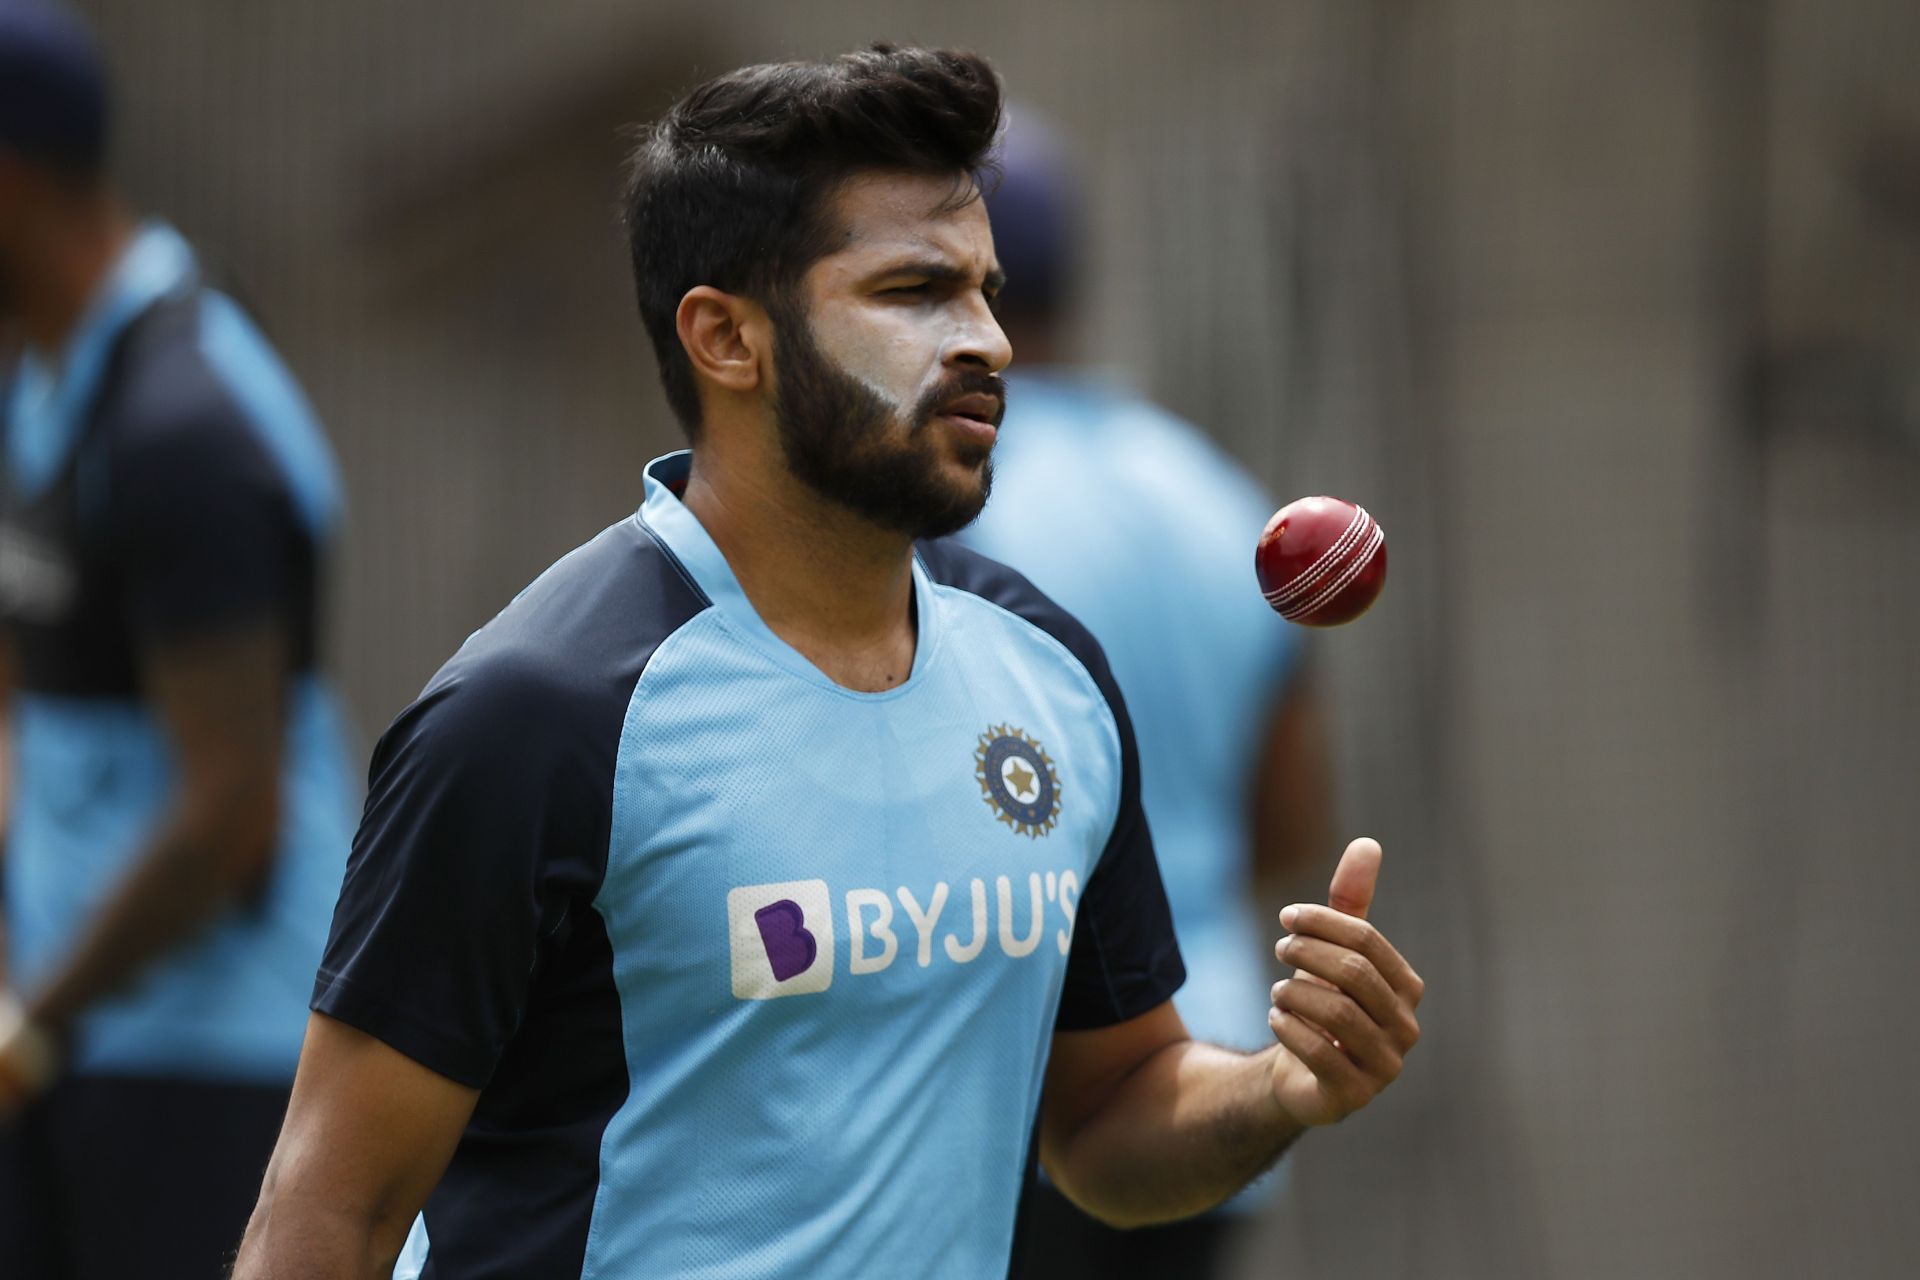 Shardul Thakur is currently one of the top all-rounders in India